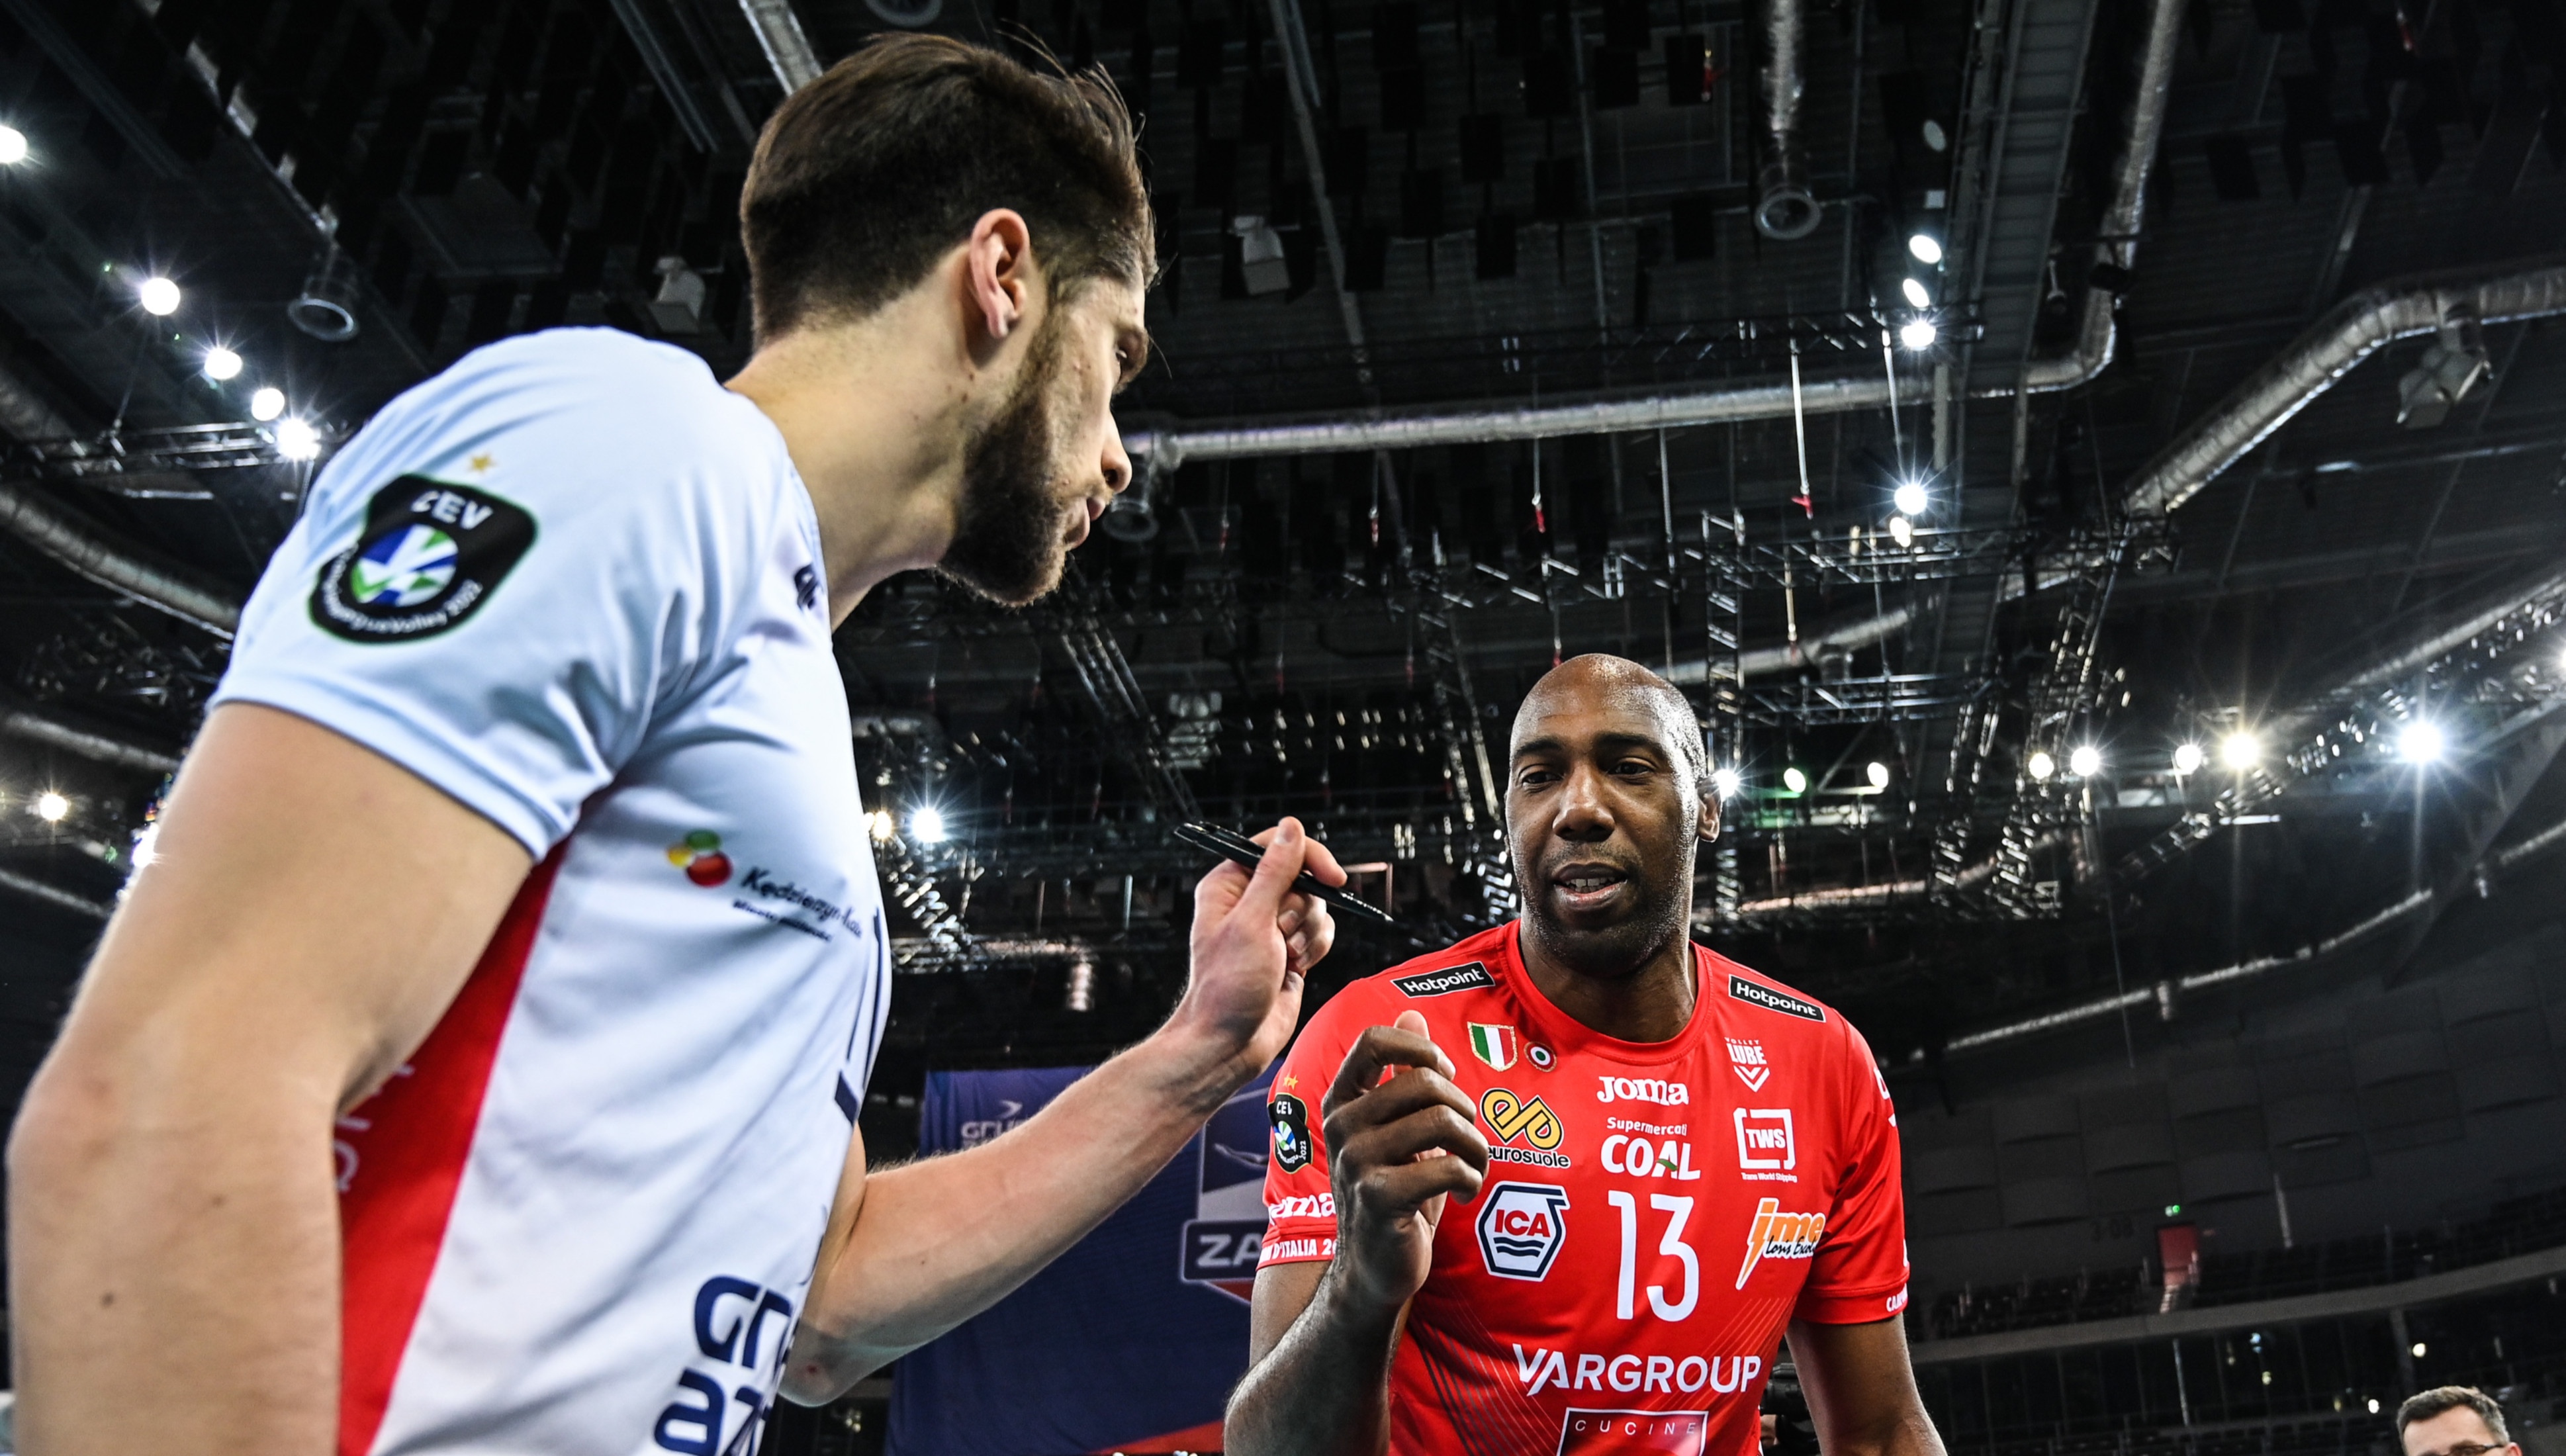 ZAKSA in the quarterfinals of the Volleyball Champions League